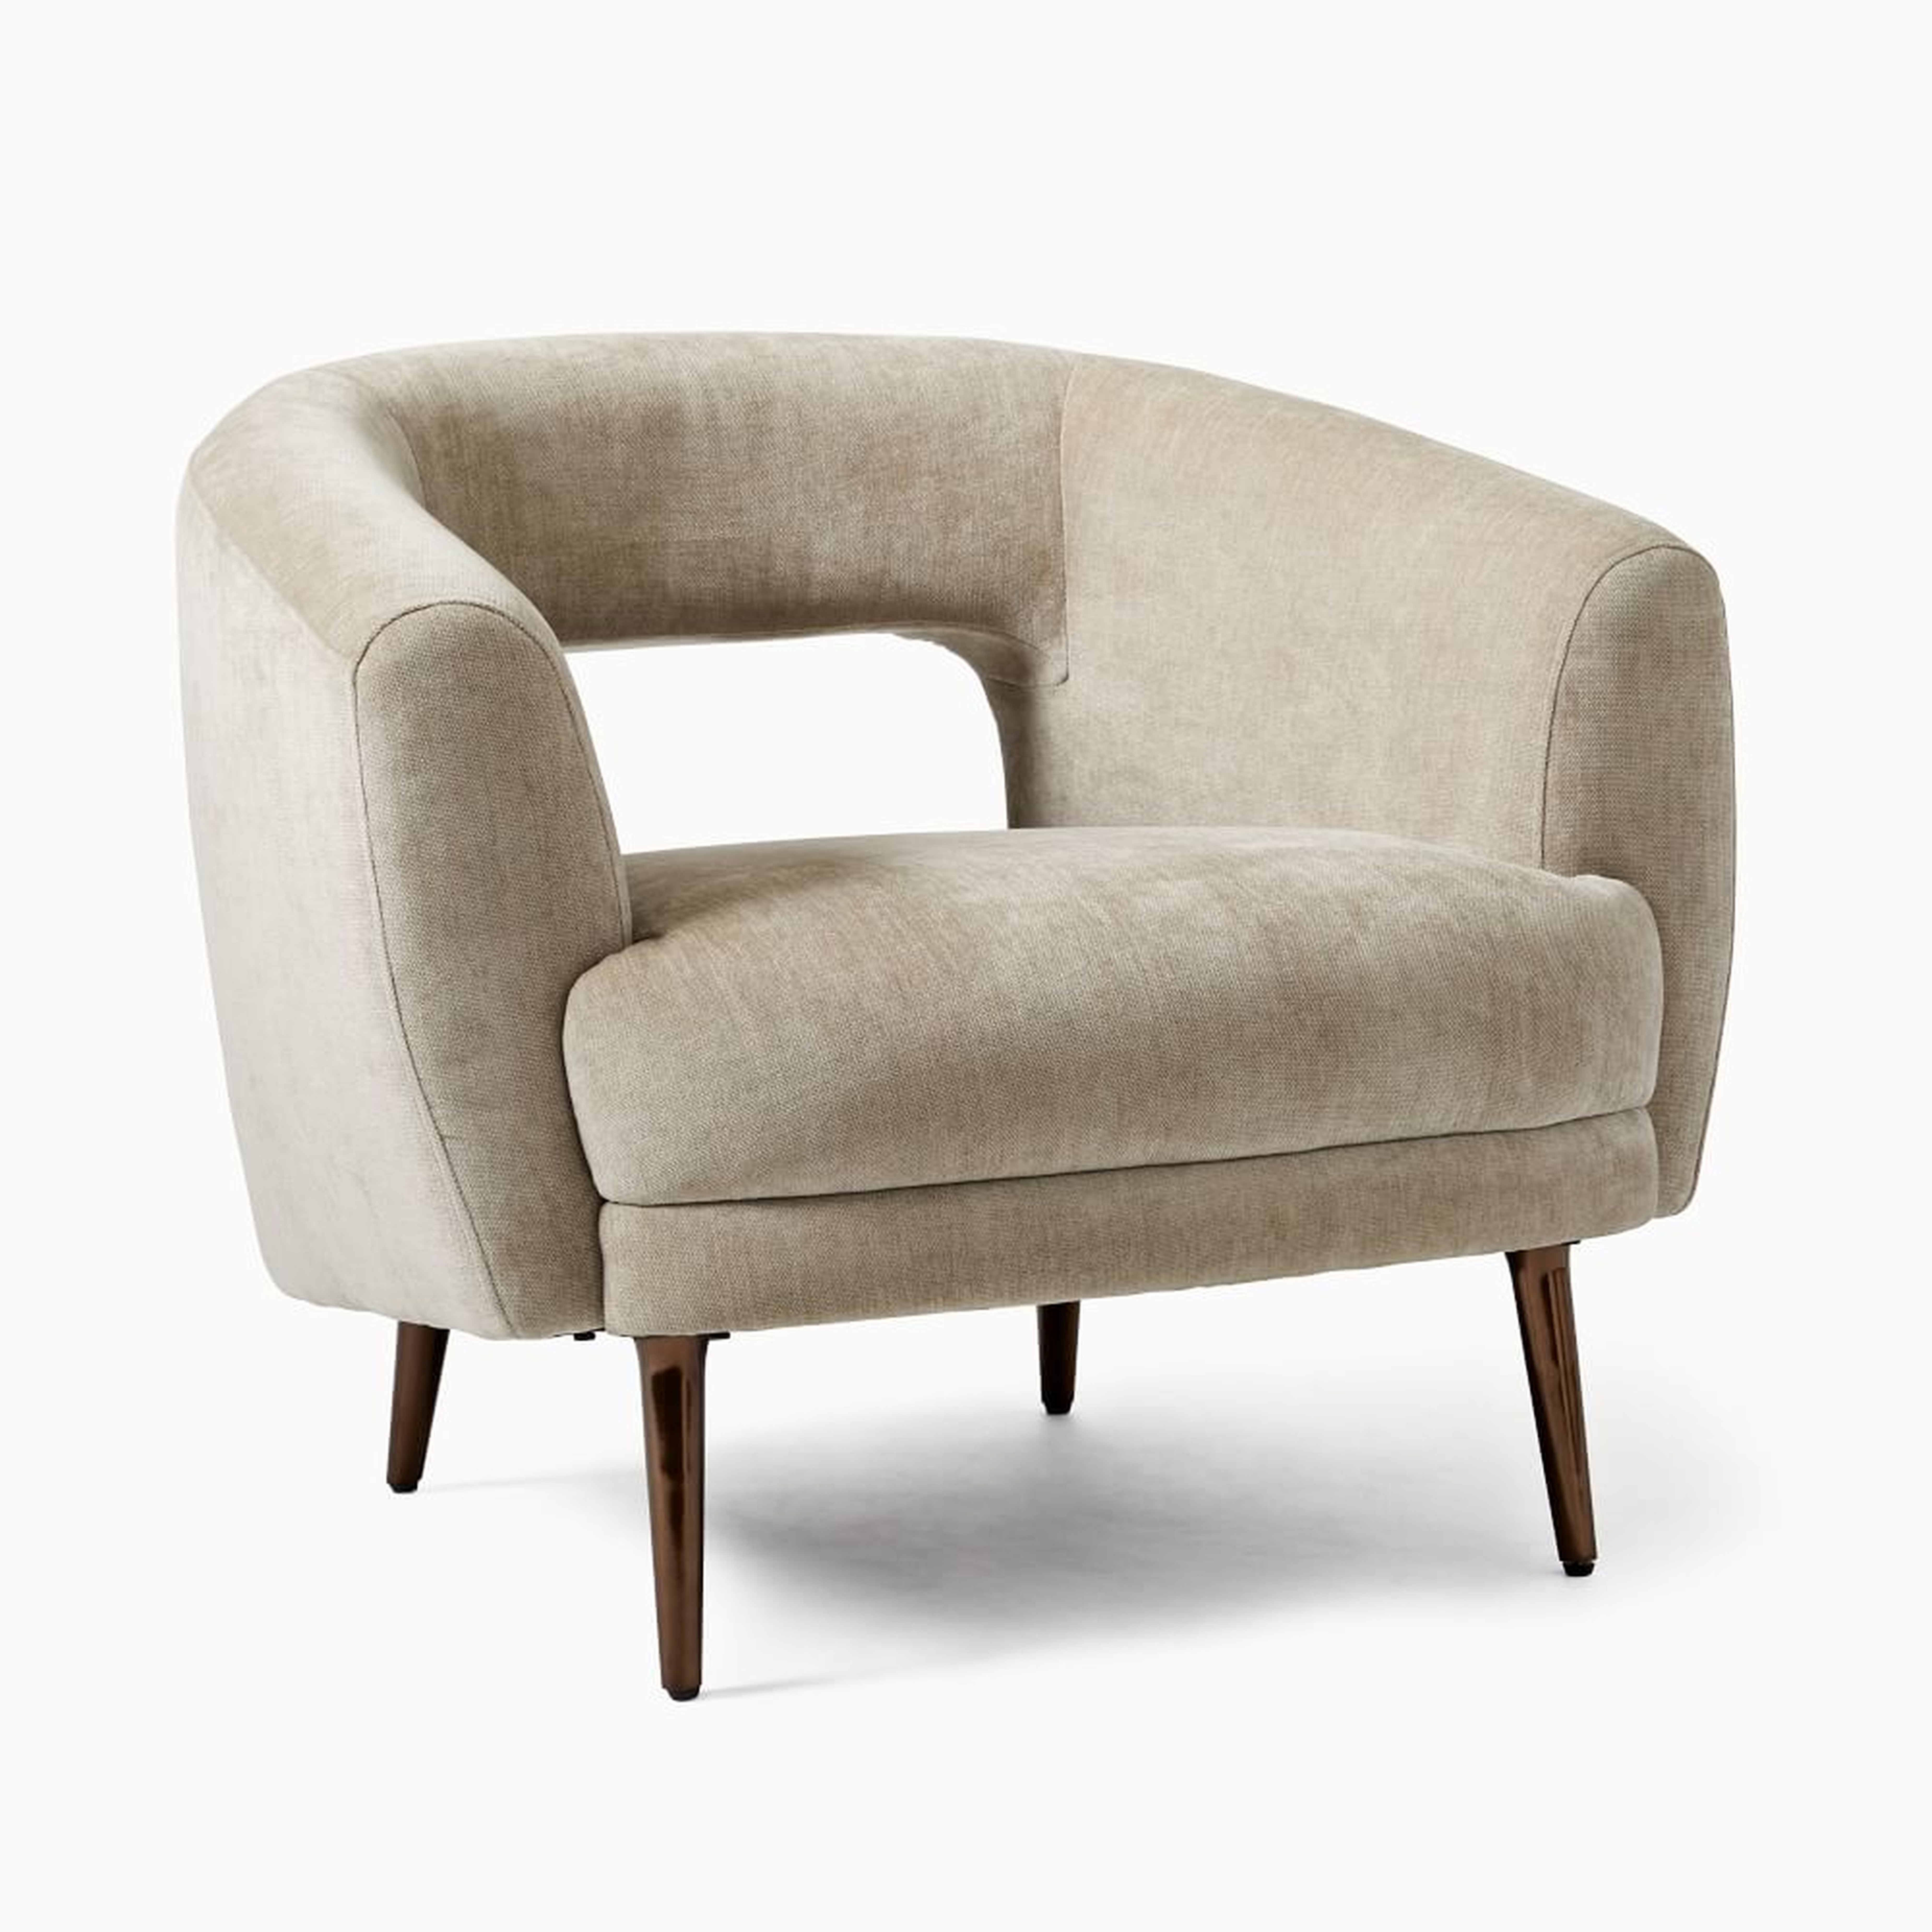 Millie Chair, Poly, Distressed Velvet, Dune, Oil Rubbed Bronze - West Elm